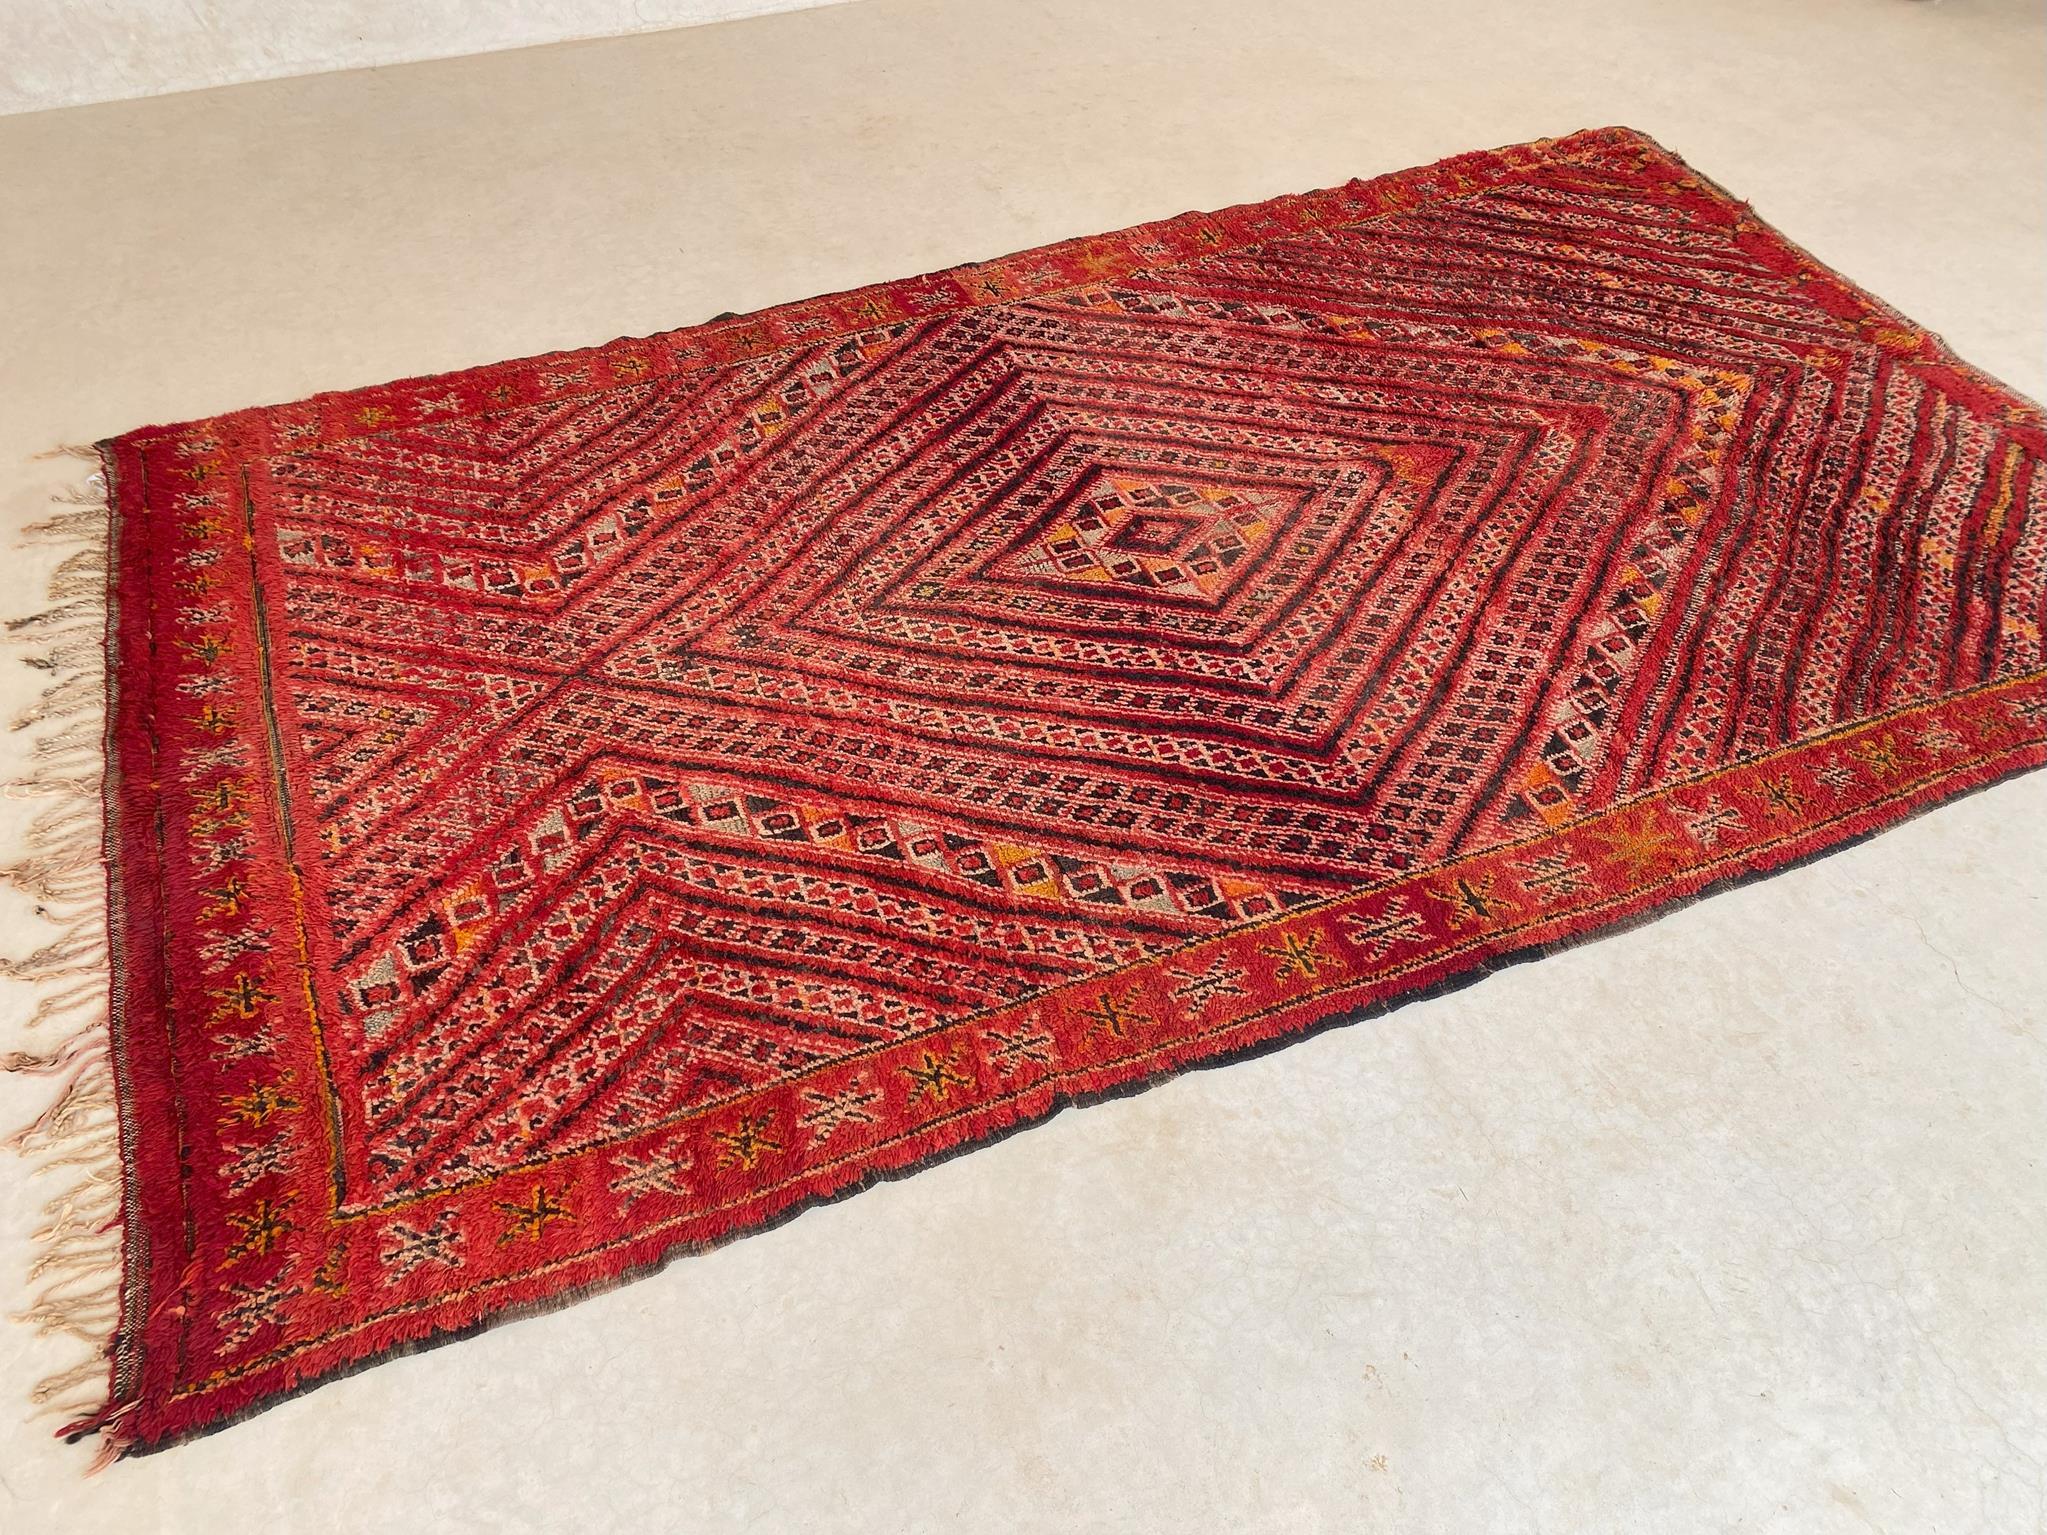 Vintage Moroccan Zayane rug - Red - 6.7x11.3feet / 205x344cm In Good Condition For Sale In Marrakech, MA